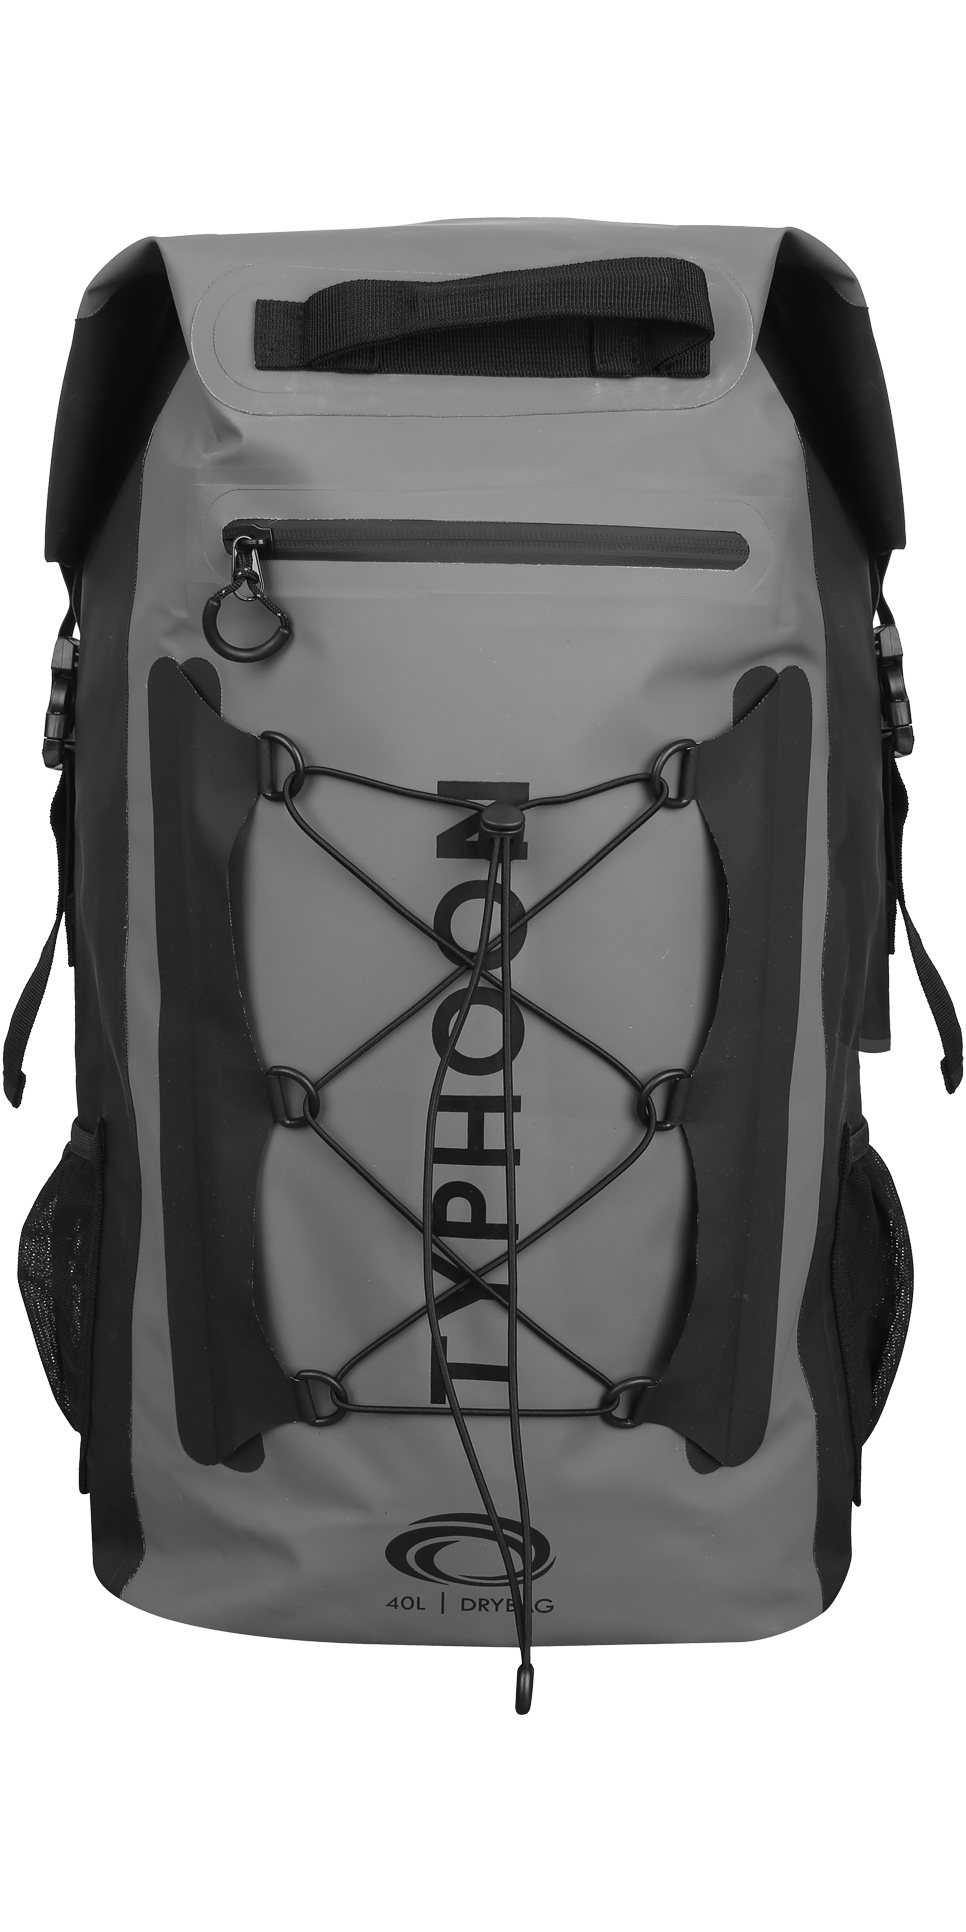 2020 Typhoon 30L Backpack Dry Bag Black 495016 - Accessories - Luggage &  Dry Bags | Wetsuit Outlet